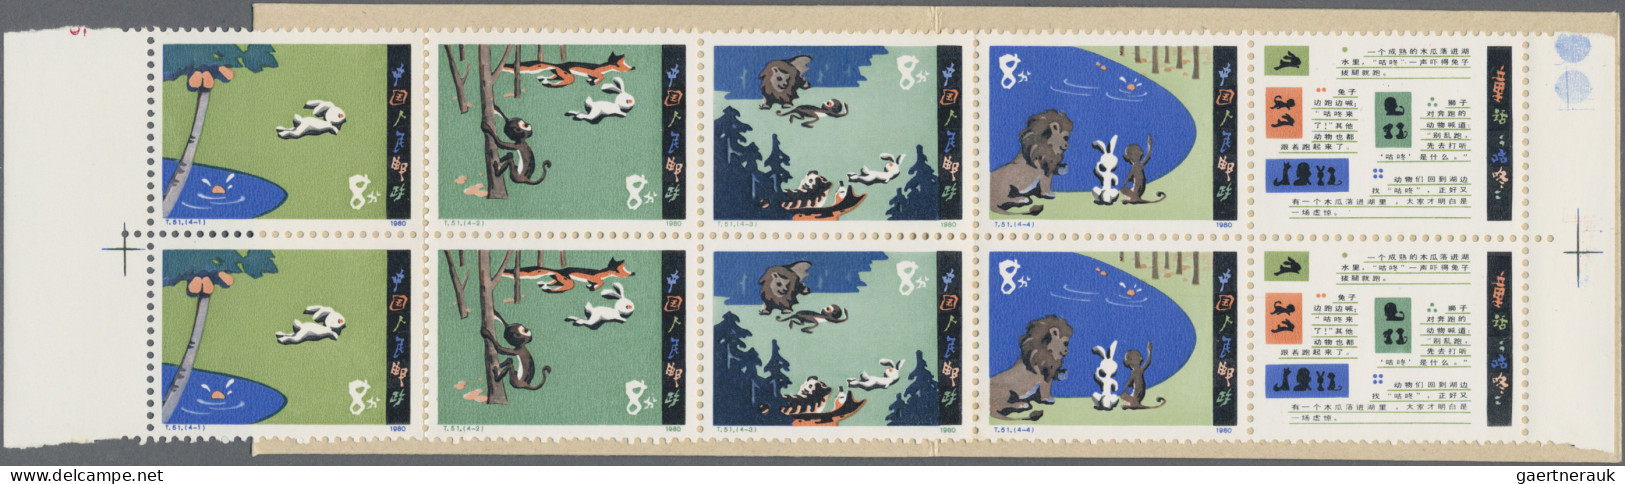 China (PRC): 1980, Gudong (T51) Booklet, Mint Never Hinged MNH (Michel €700) - Ungebraucht